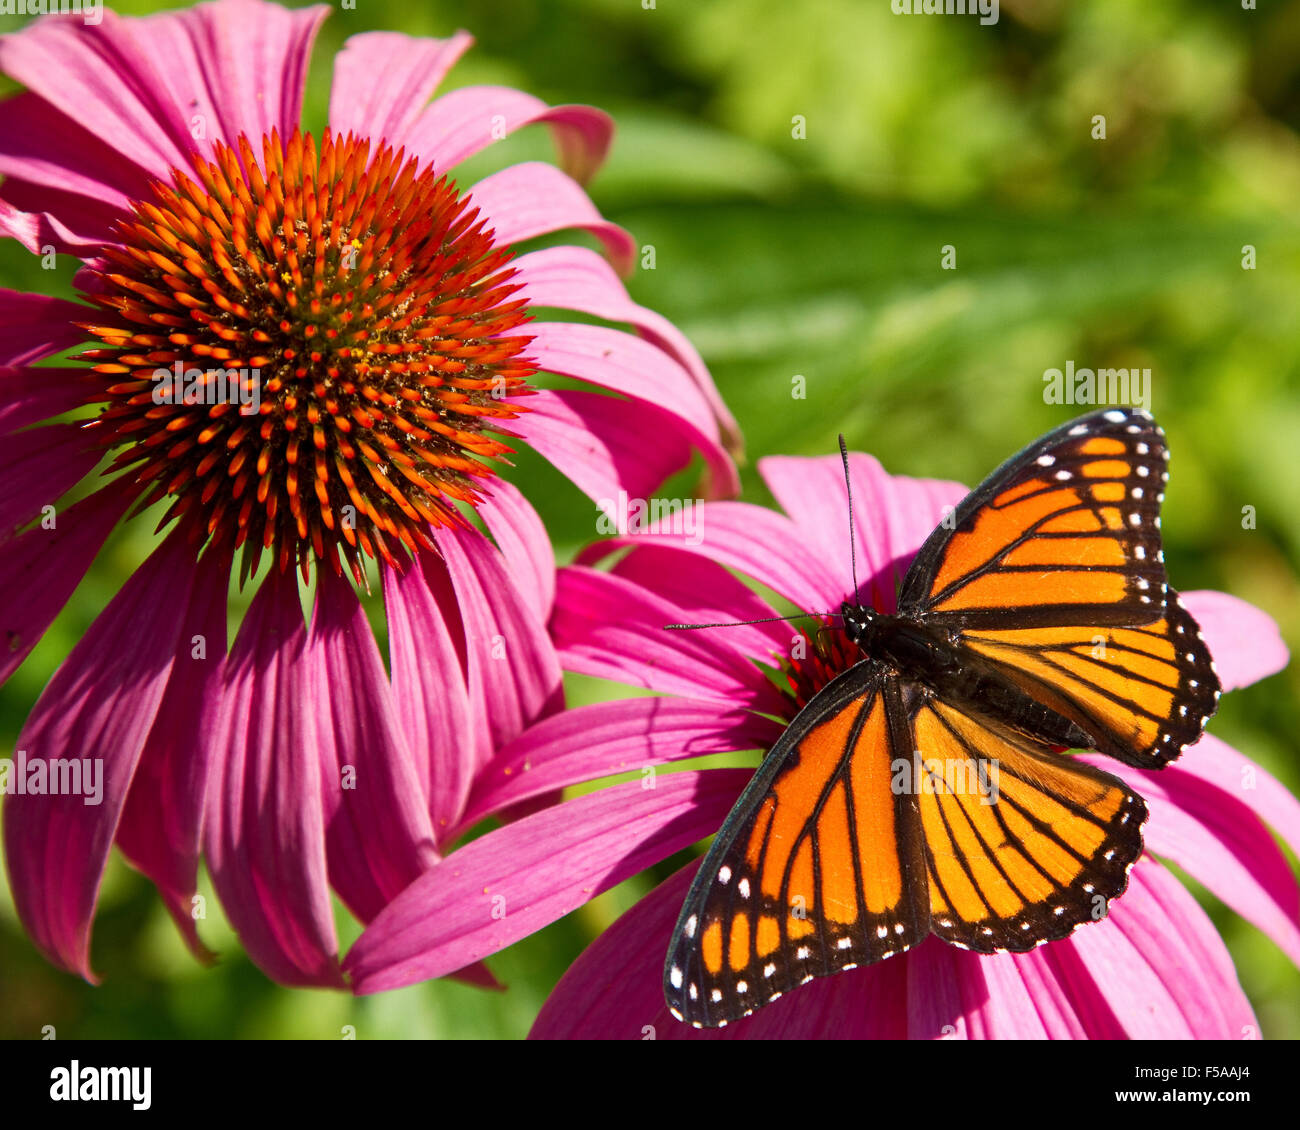 Butterfly on flower. Viceroy butterfly, Limenitis archippus, resting on colorful Echinacea flower with wings spread in sun. Stock Photo